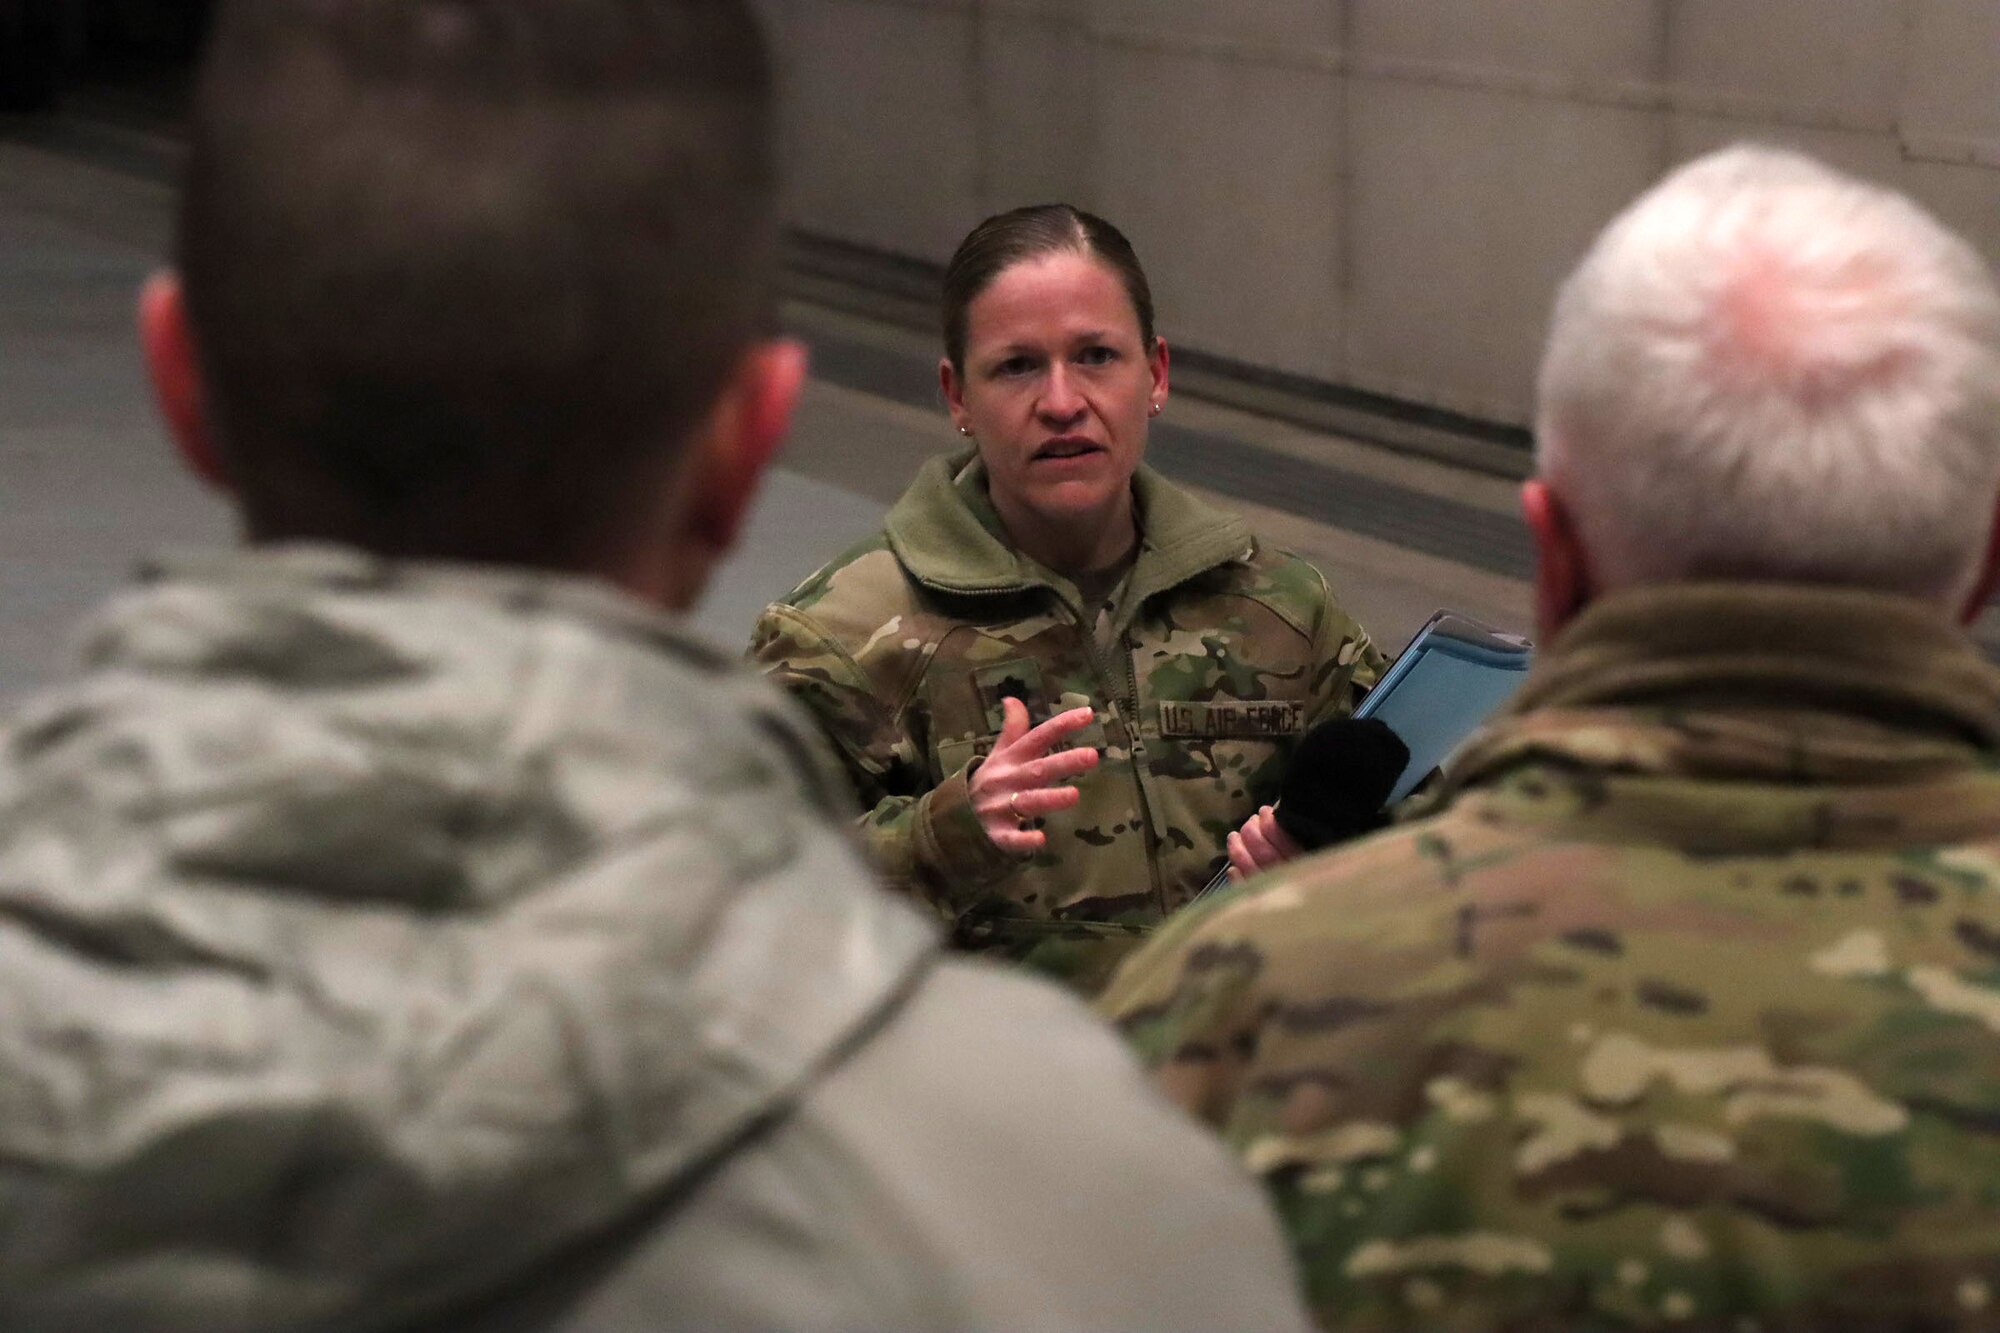 20th Air Force, Air Force Global Strike Command and 341st Missile Wing leadership are informed of operations on a future Missile Maintenance Dispatch Facility.